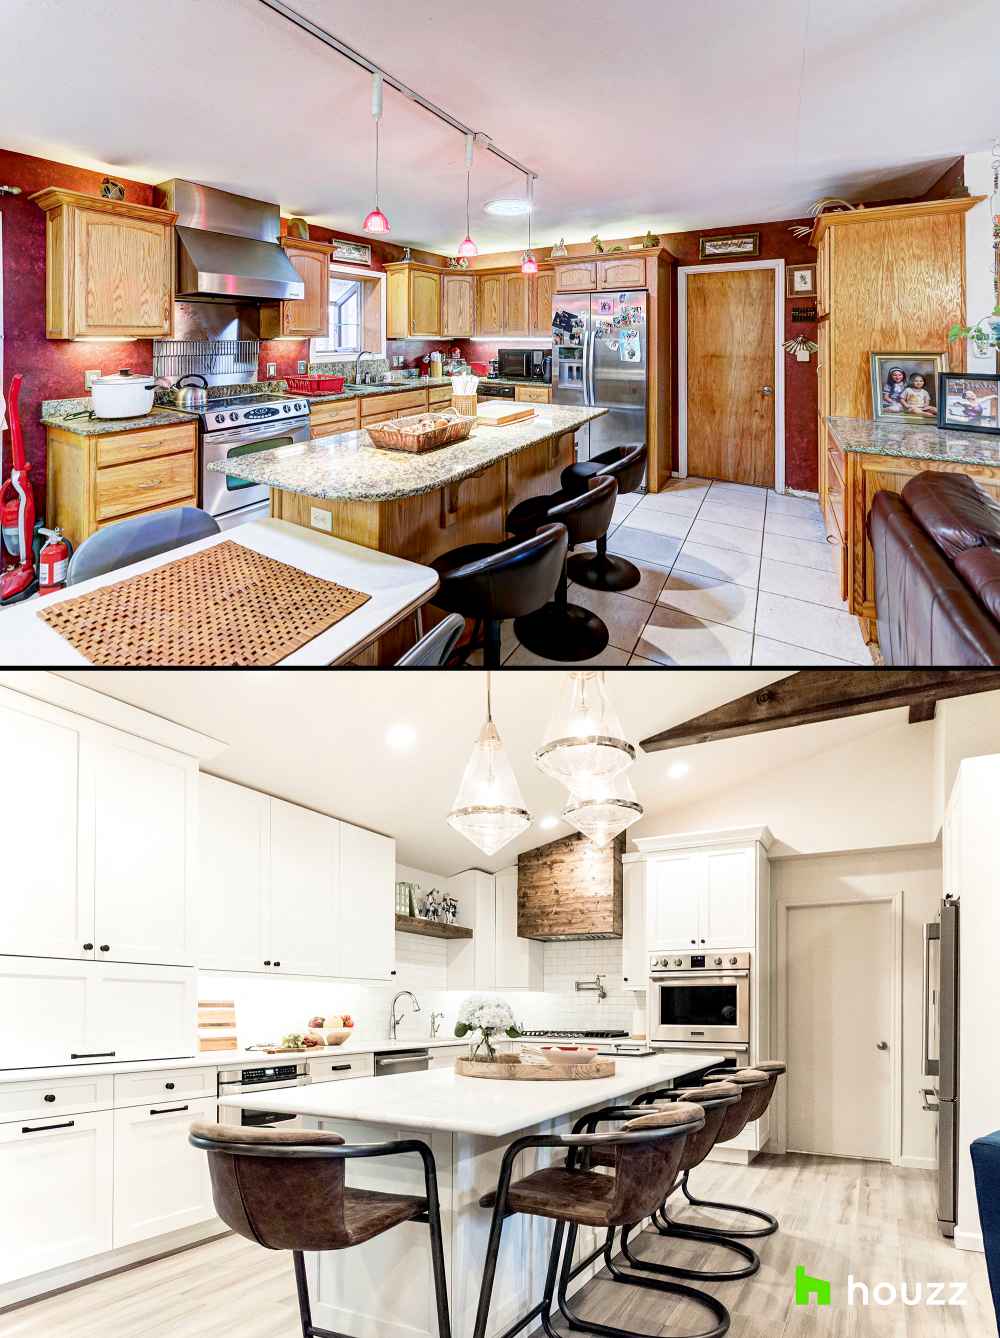 Olivia Munn Before and After My Houzz